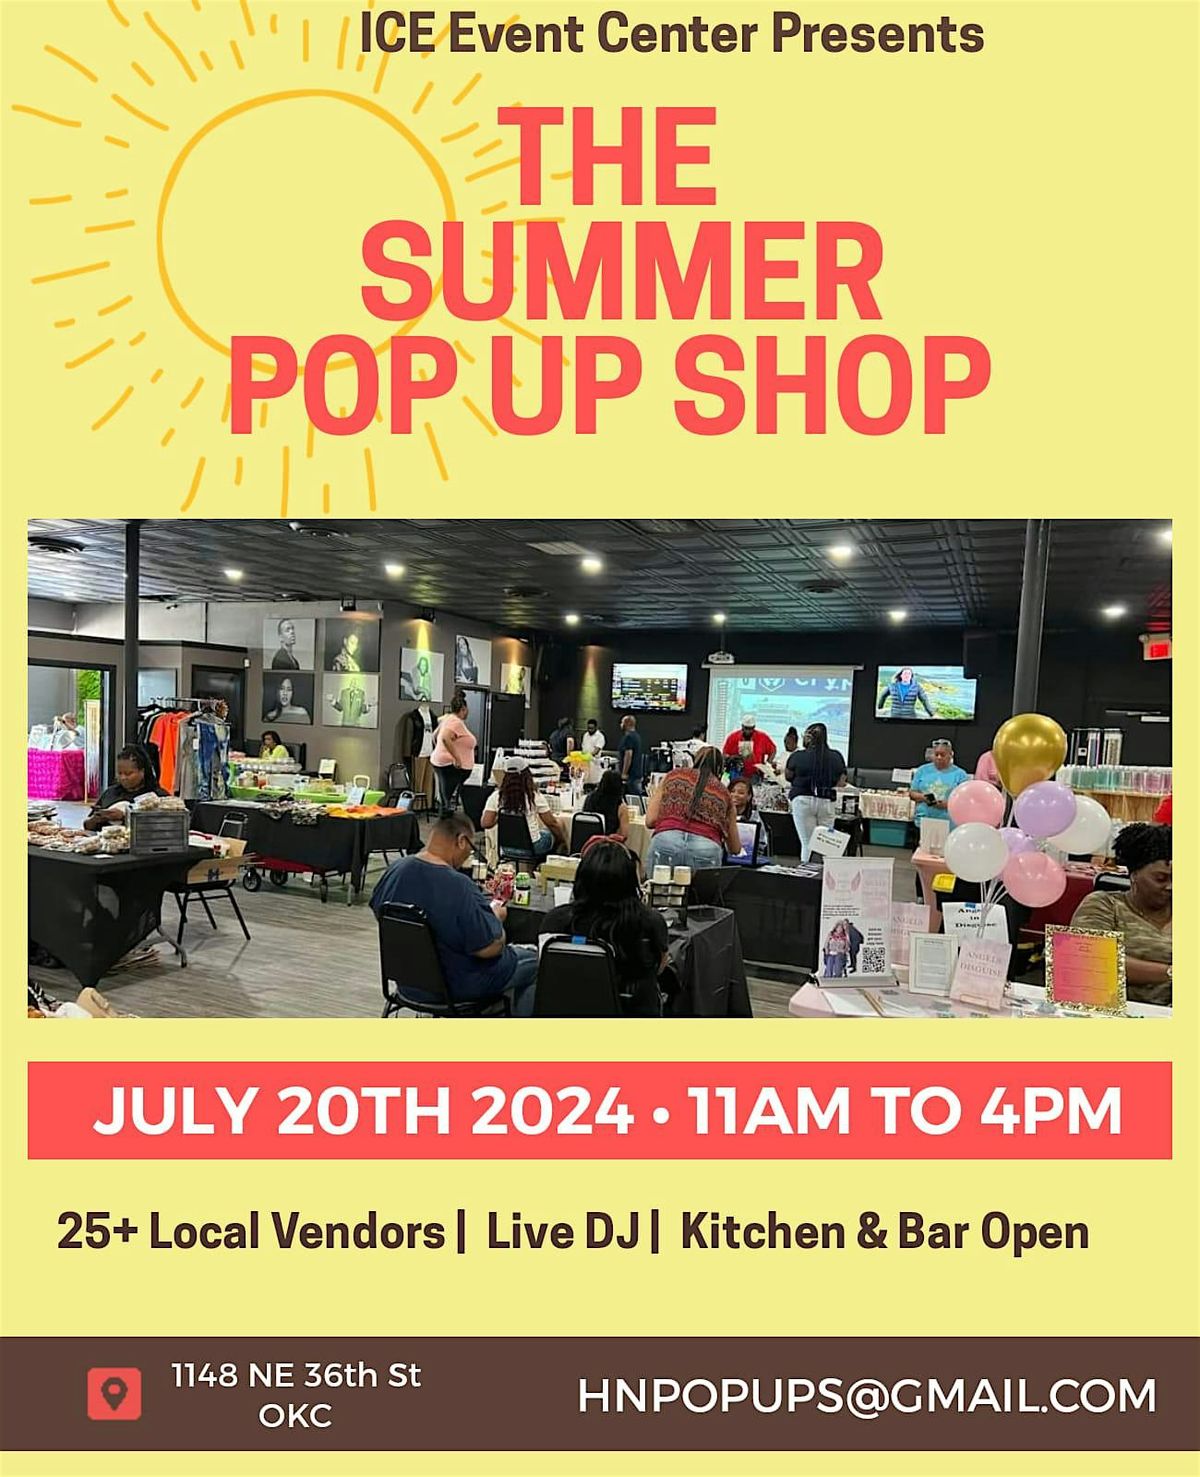 ICE Event Center Presents THE SUMMER POP UP SHOP